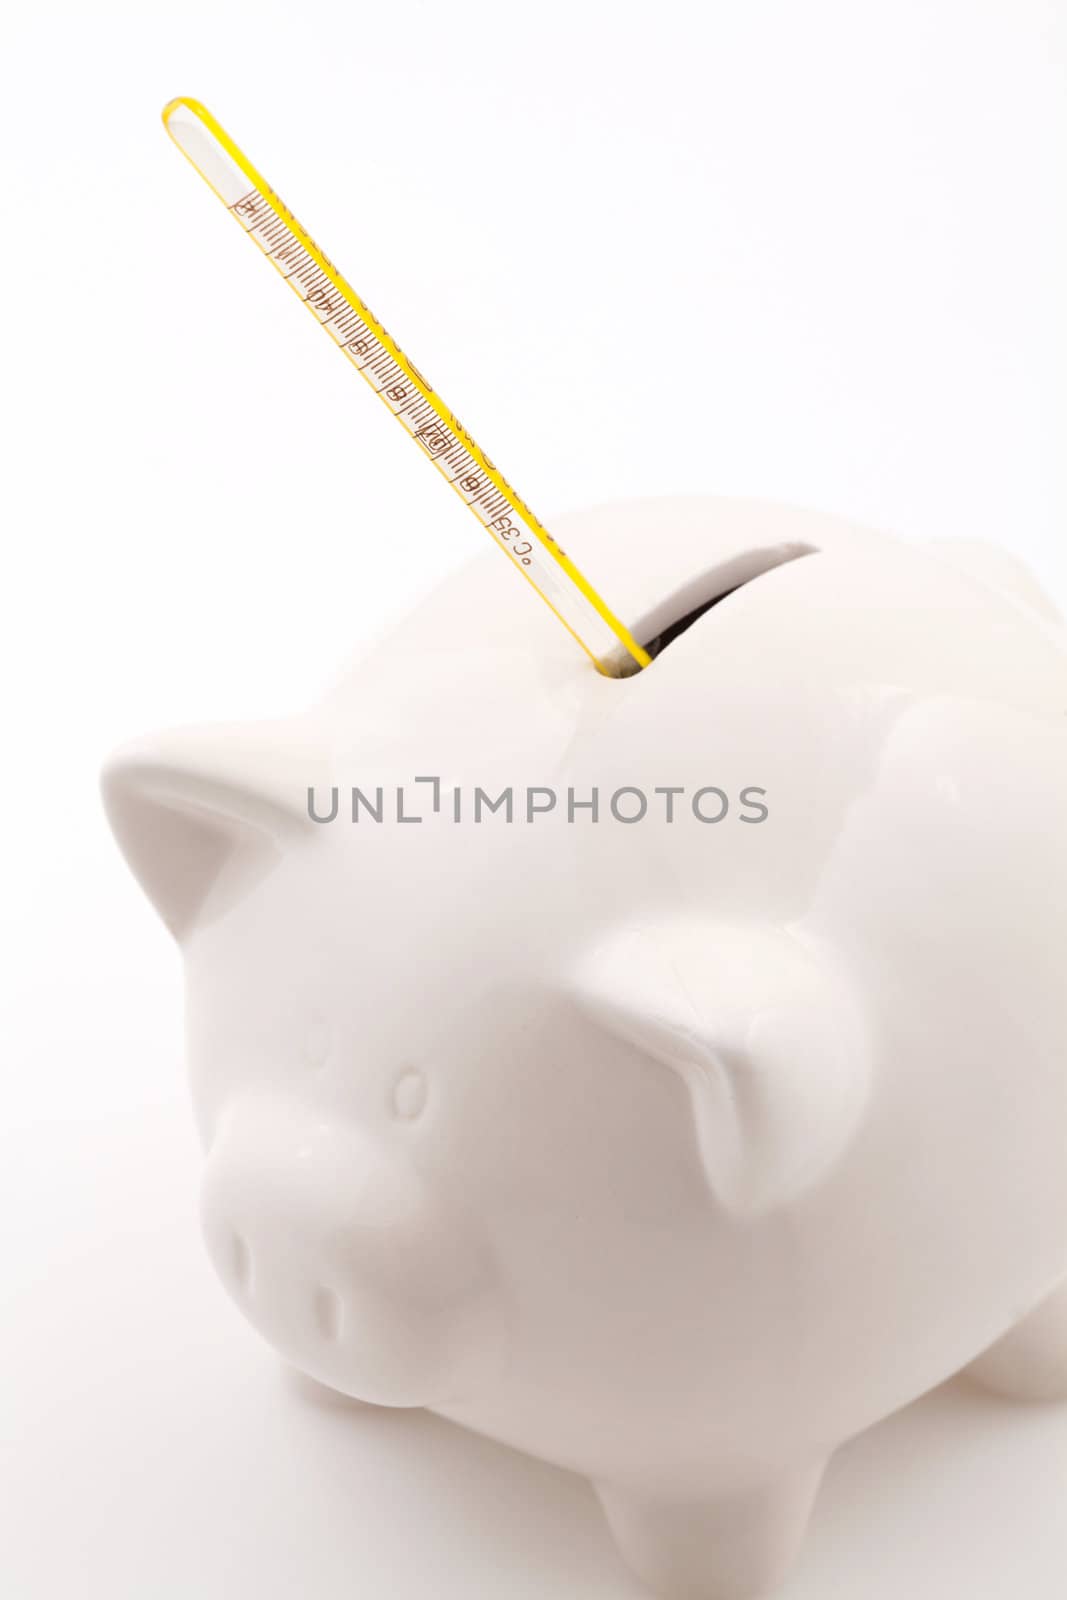 Piggy bank money box. Let's take the temperature of the economy with a thermometer